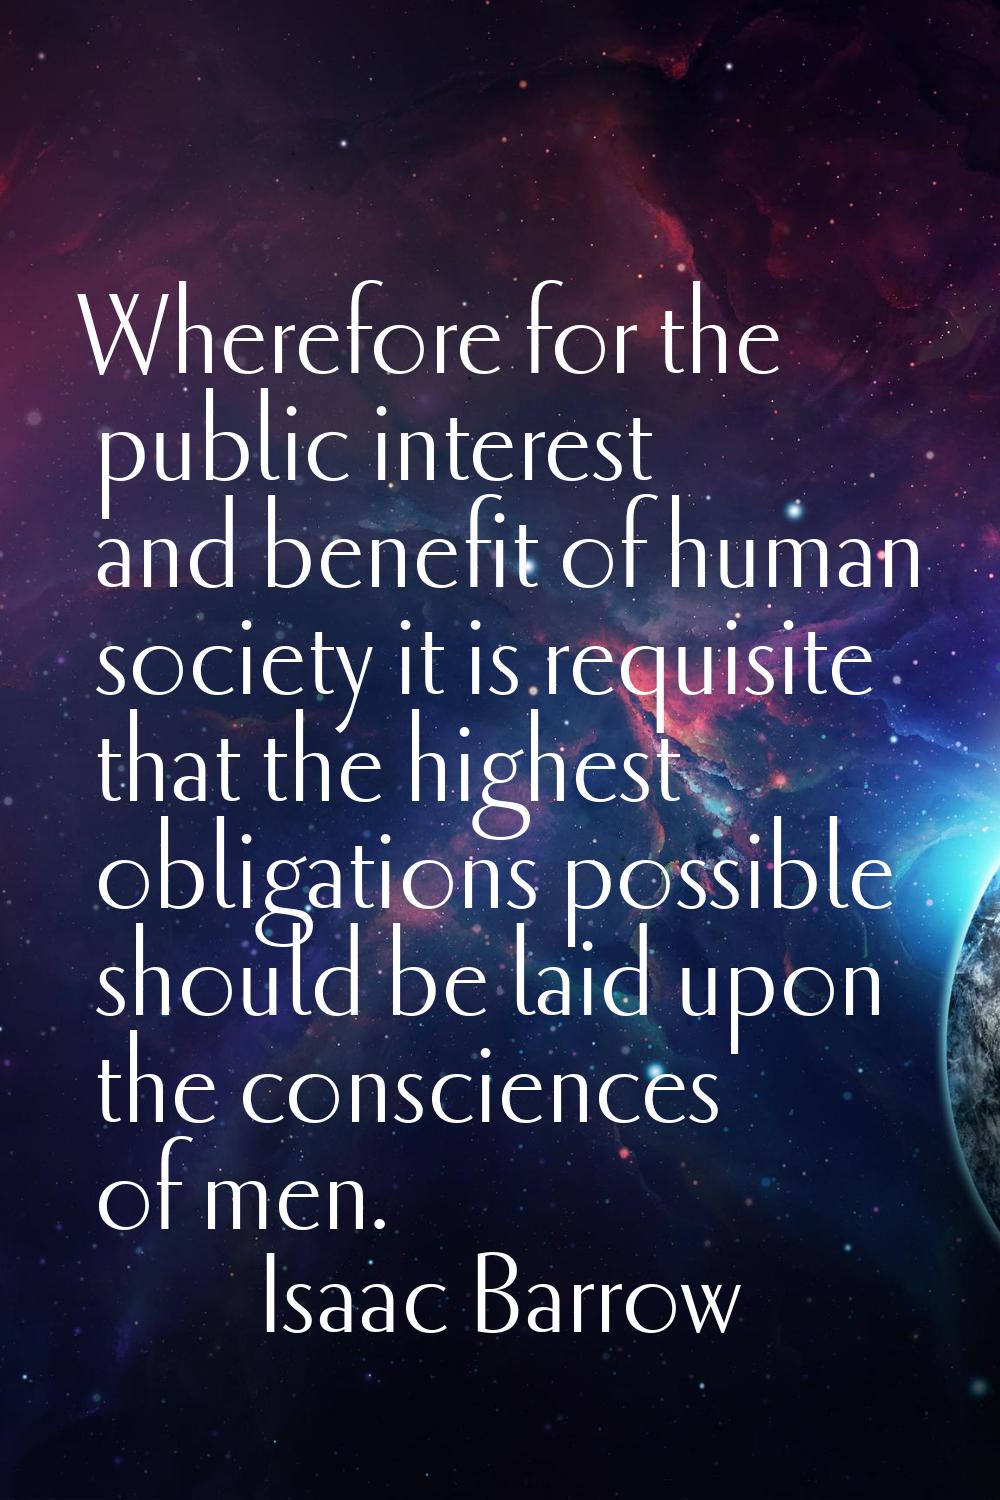 Wherefore for the public interest and benefit of human society it is requisite that the highest obl